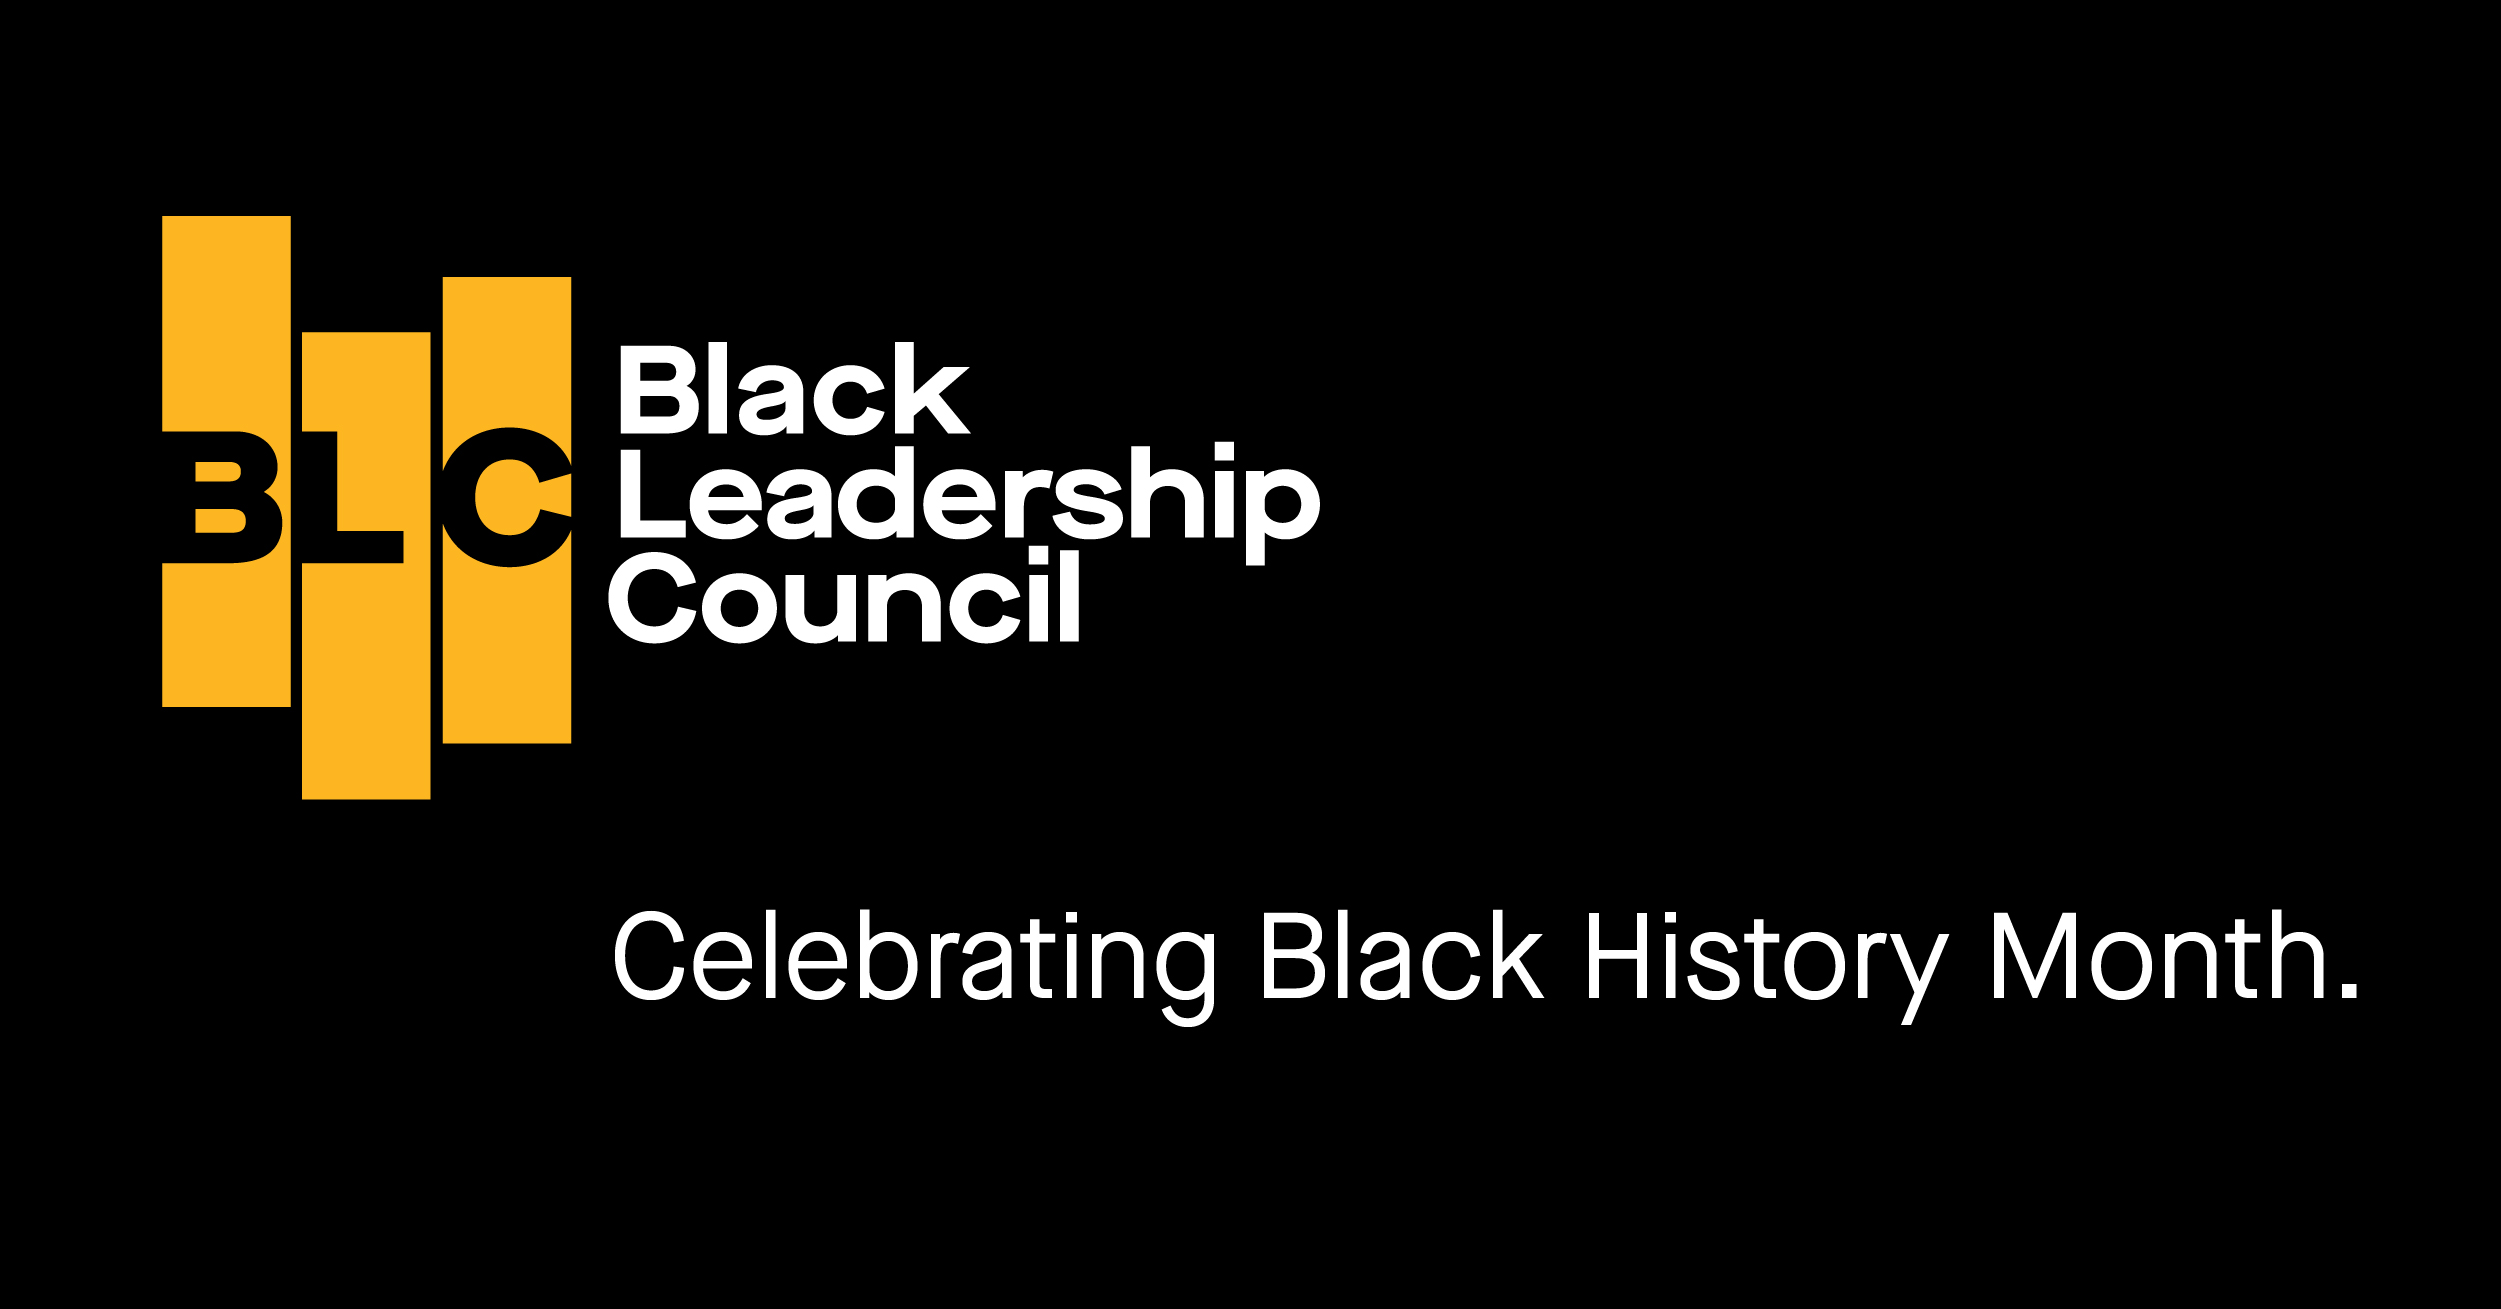 Sharing Black history to enrich our community